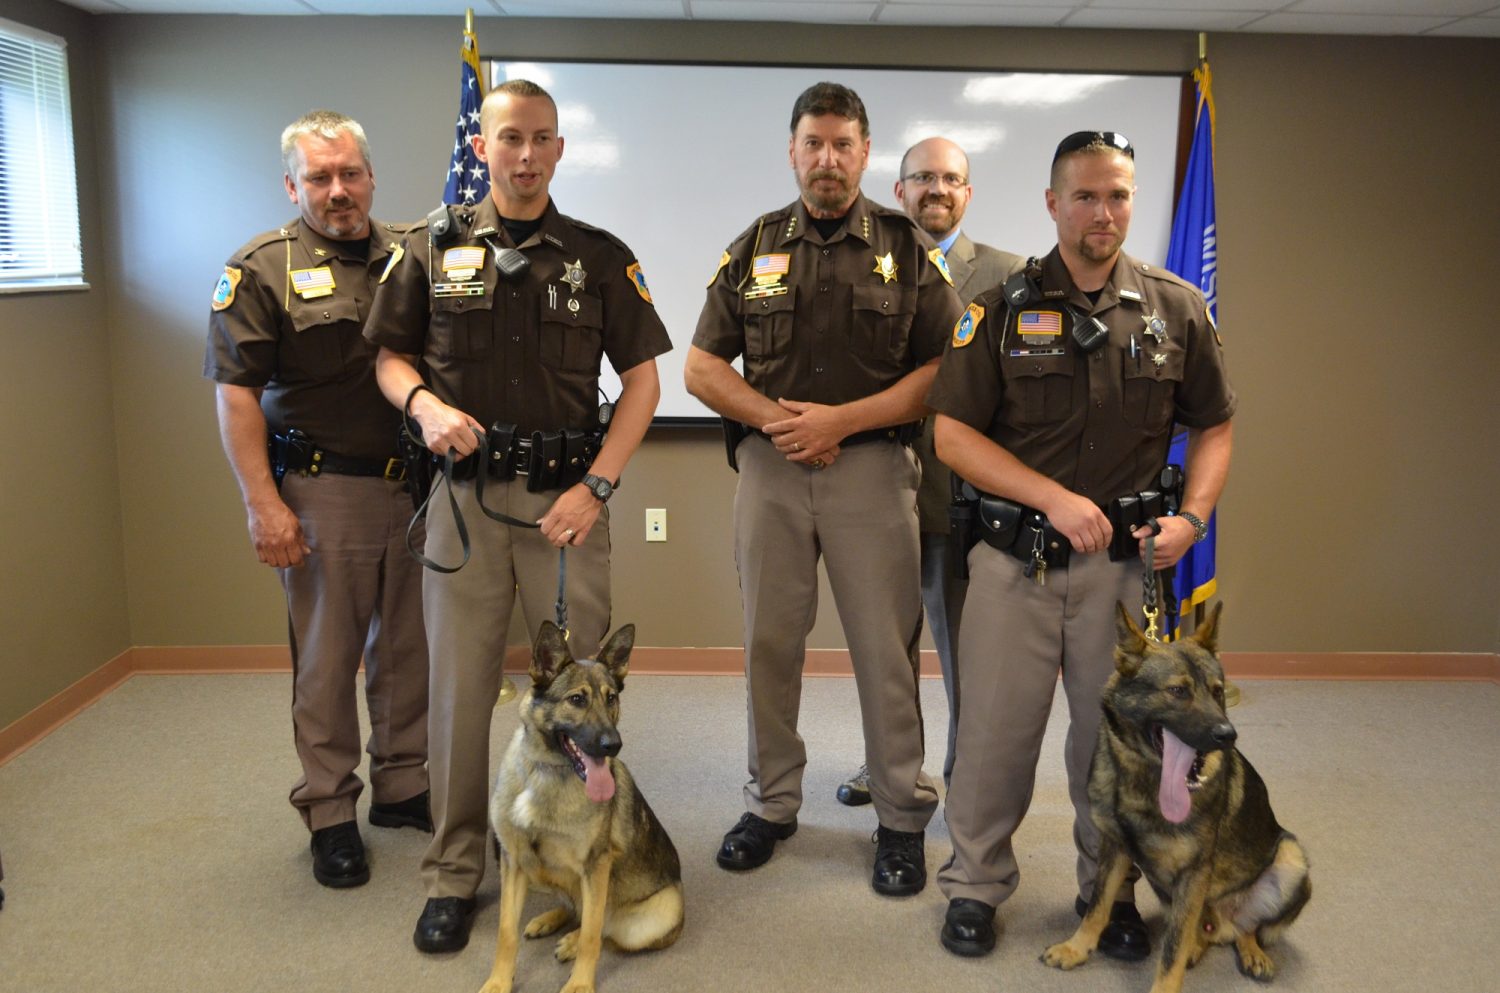 Sheriff's Office Welcomes New Deputies - The Lincoln County News